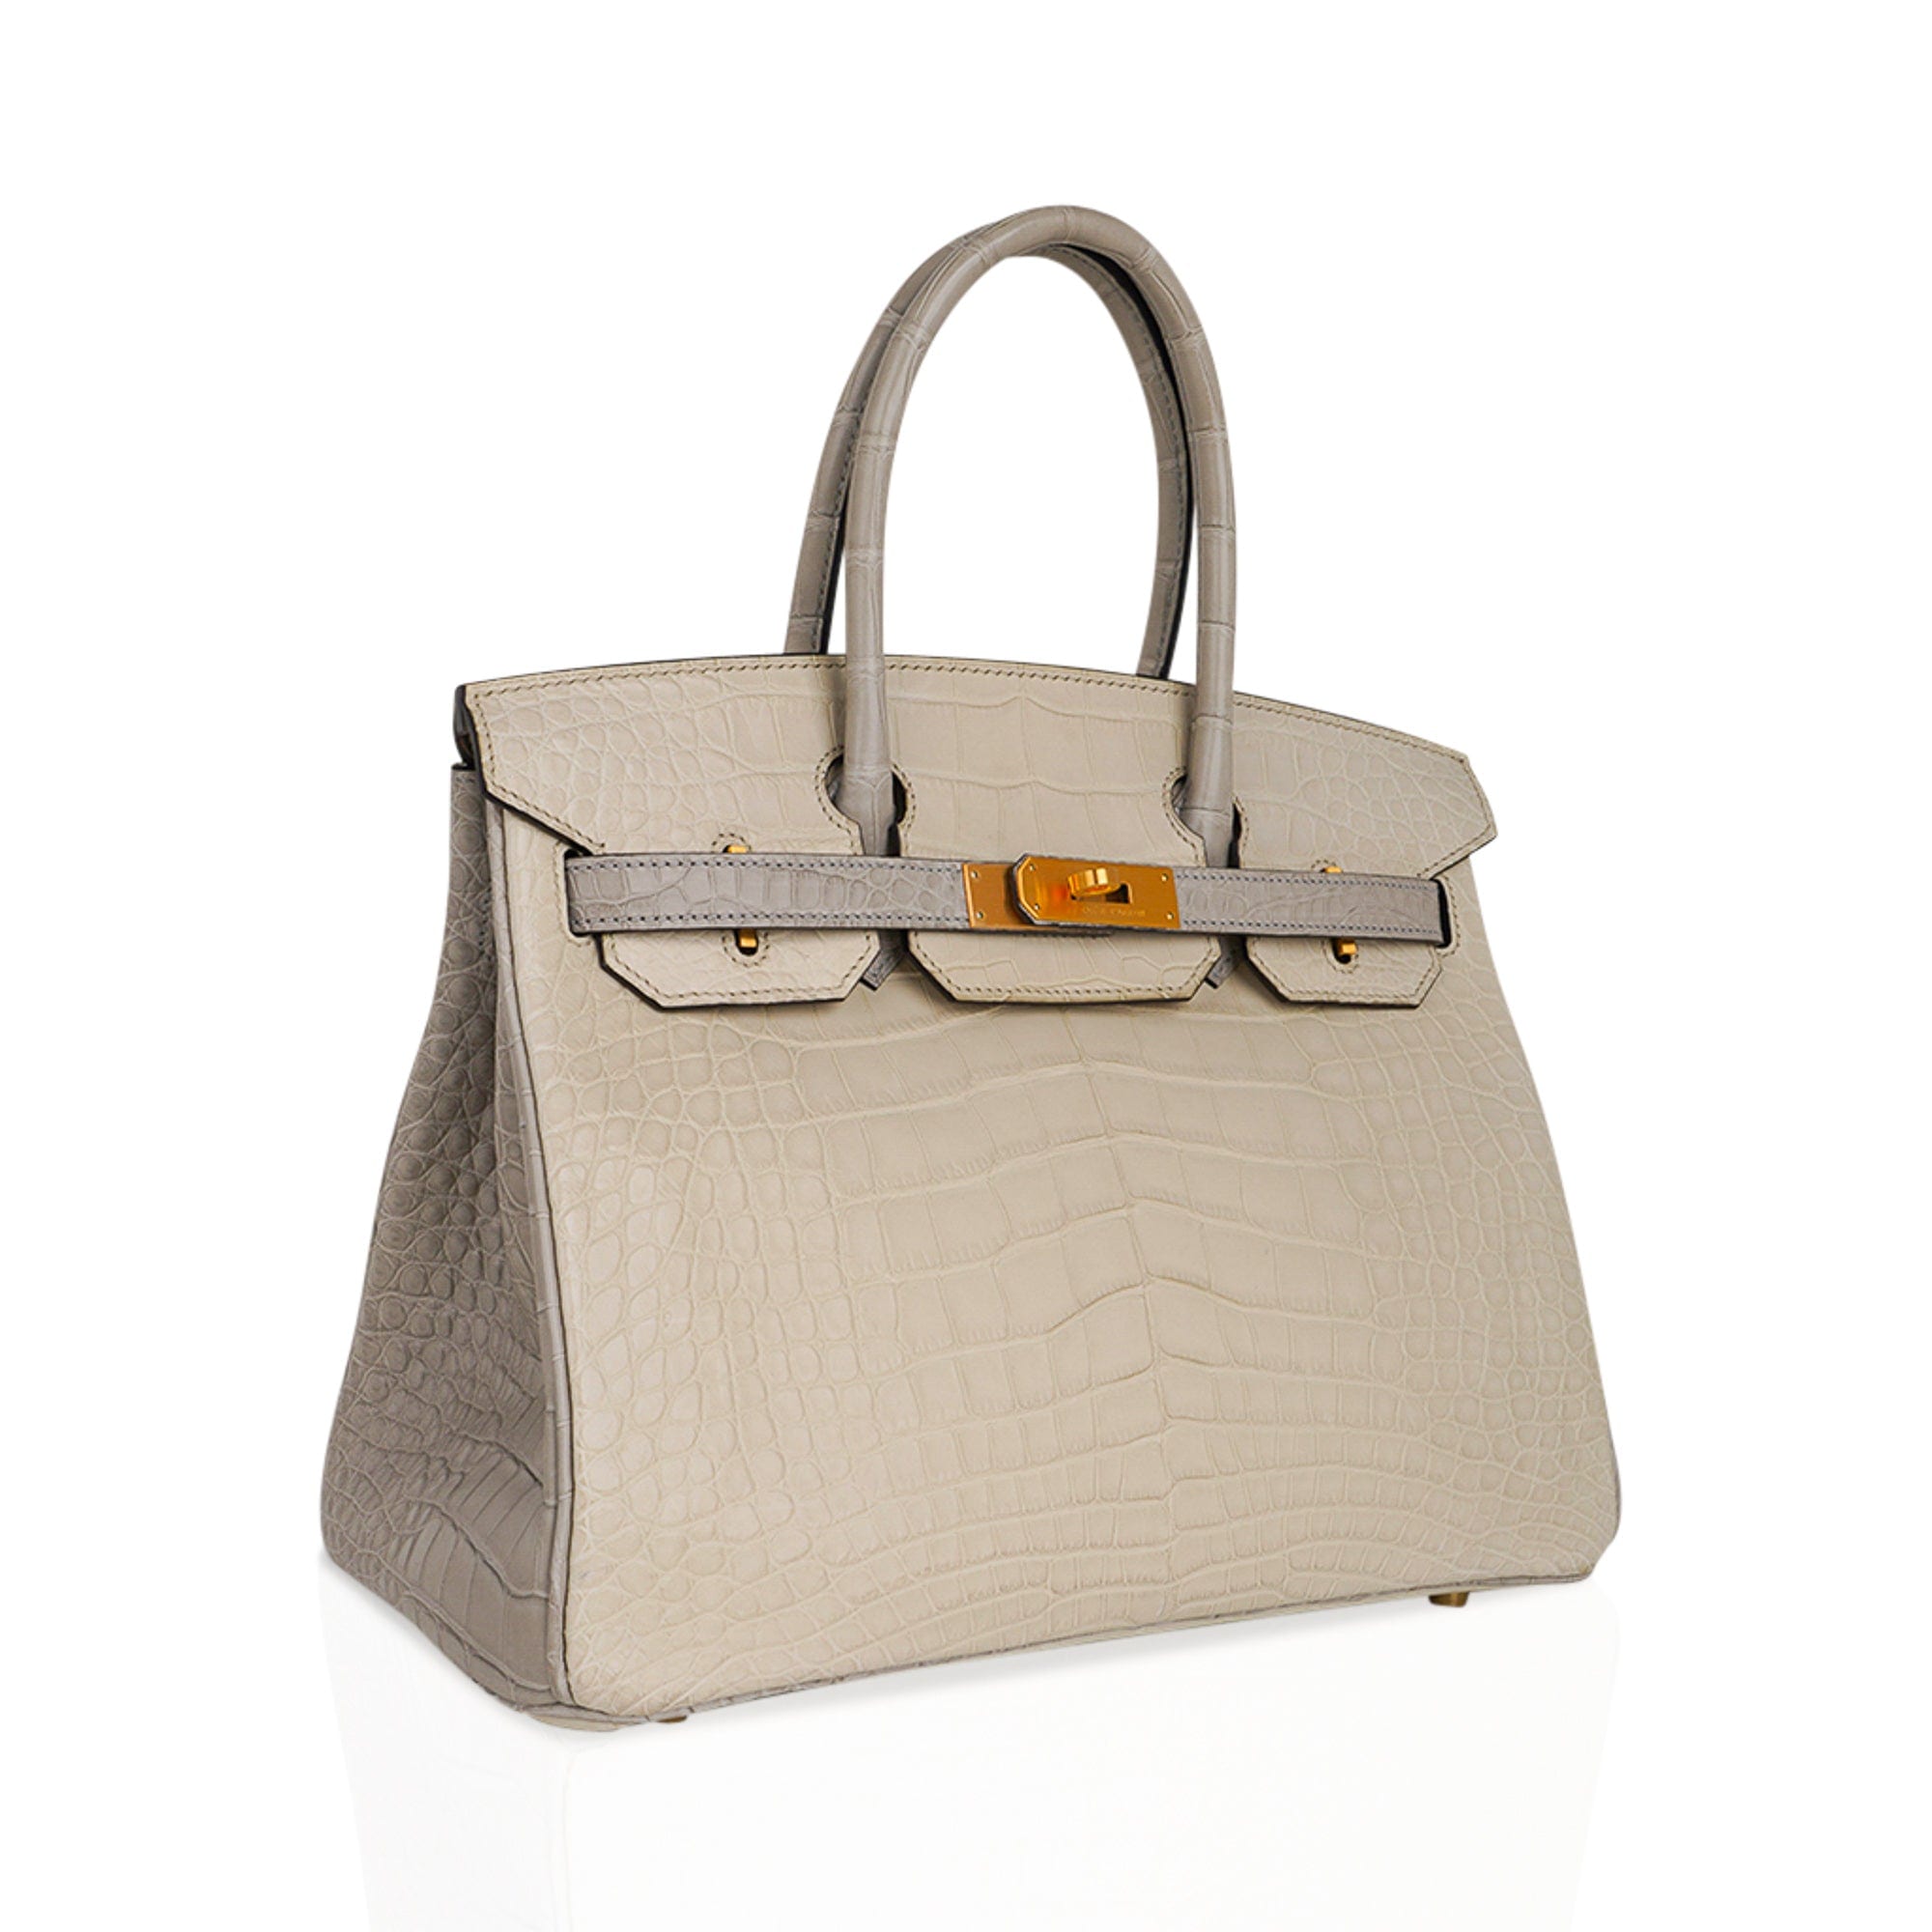 Hermes Birkin 30 Bag Gris Perle Ostrich with Gold Hardware – Mightychic